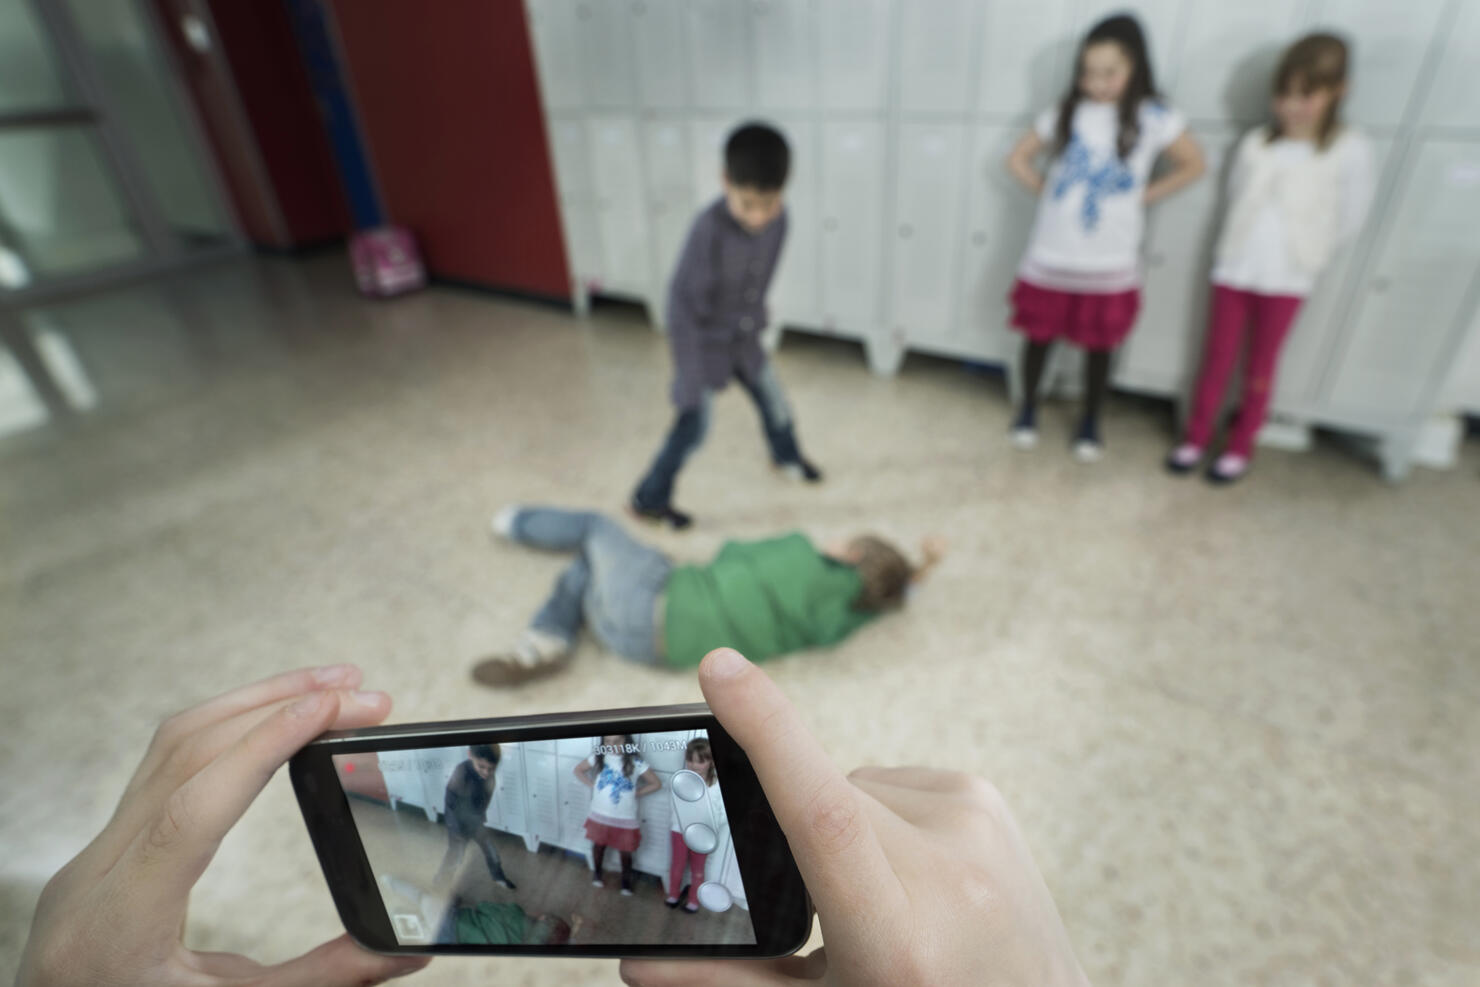 Persons hand filming two schoolboys fighting in school corridor with mobile phone, Bavaria, Germany